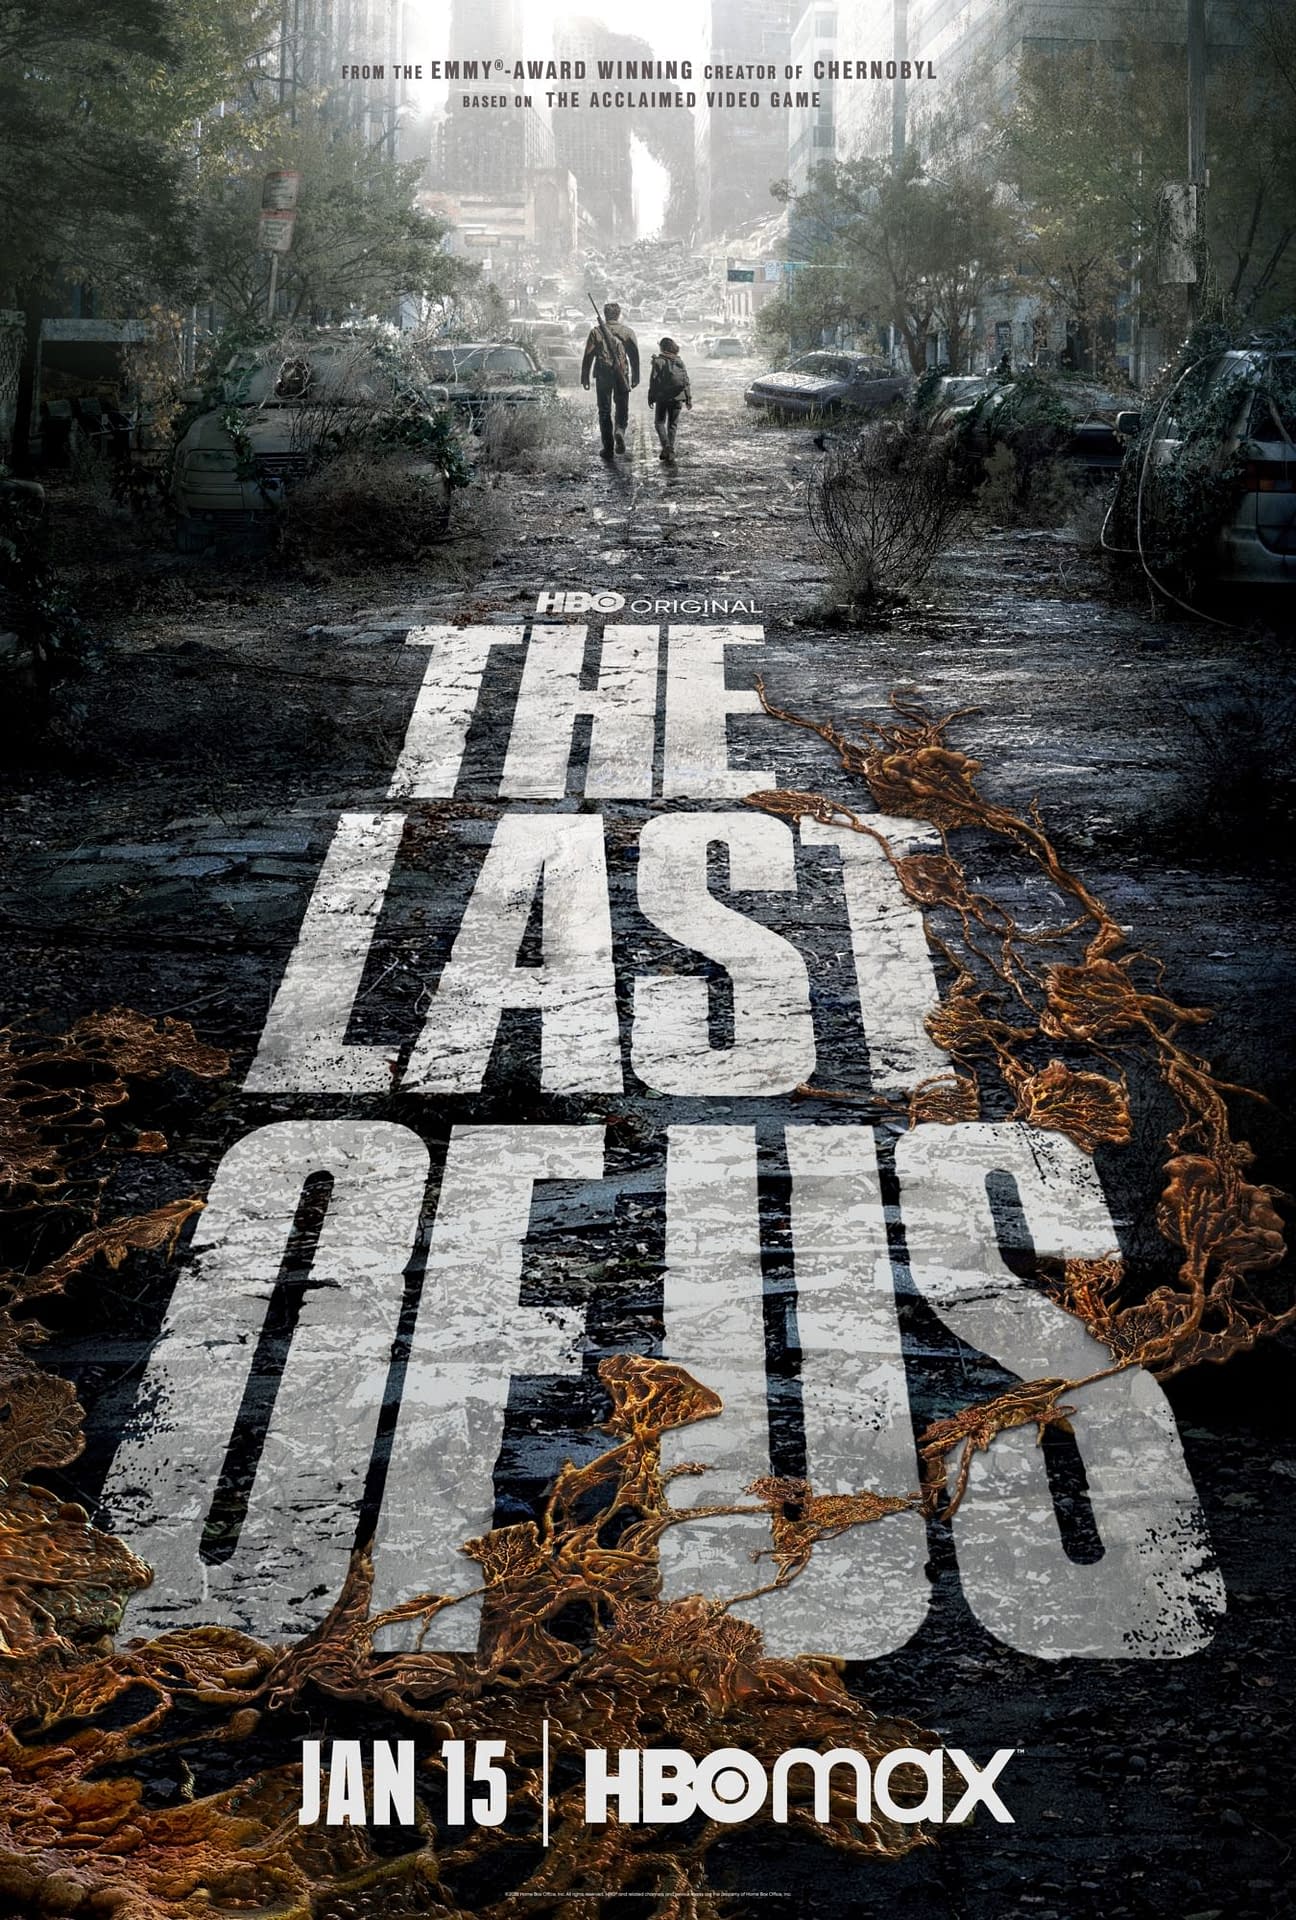 HBO The Last of Us episode 6 trailer shows a family reunion